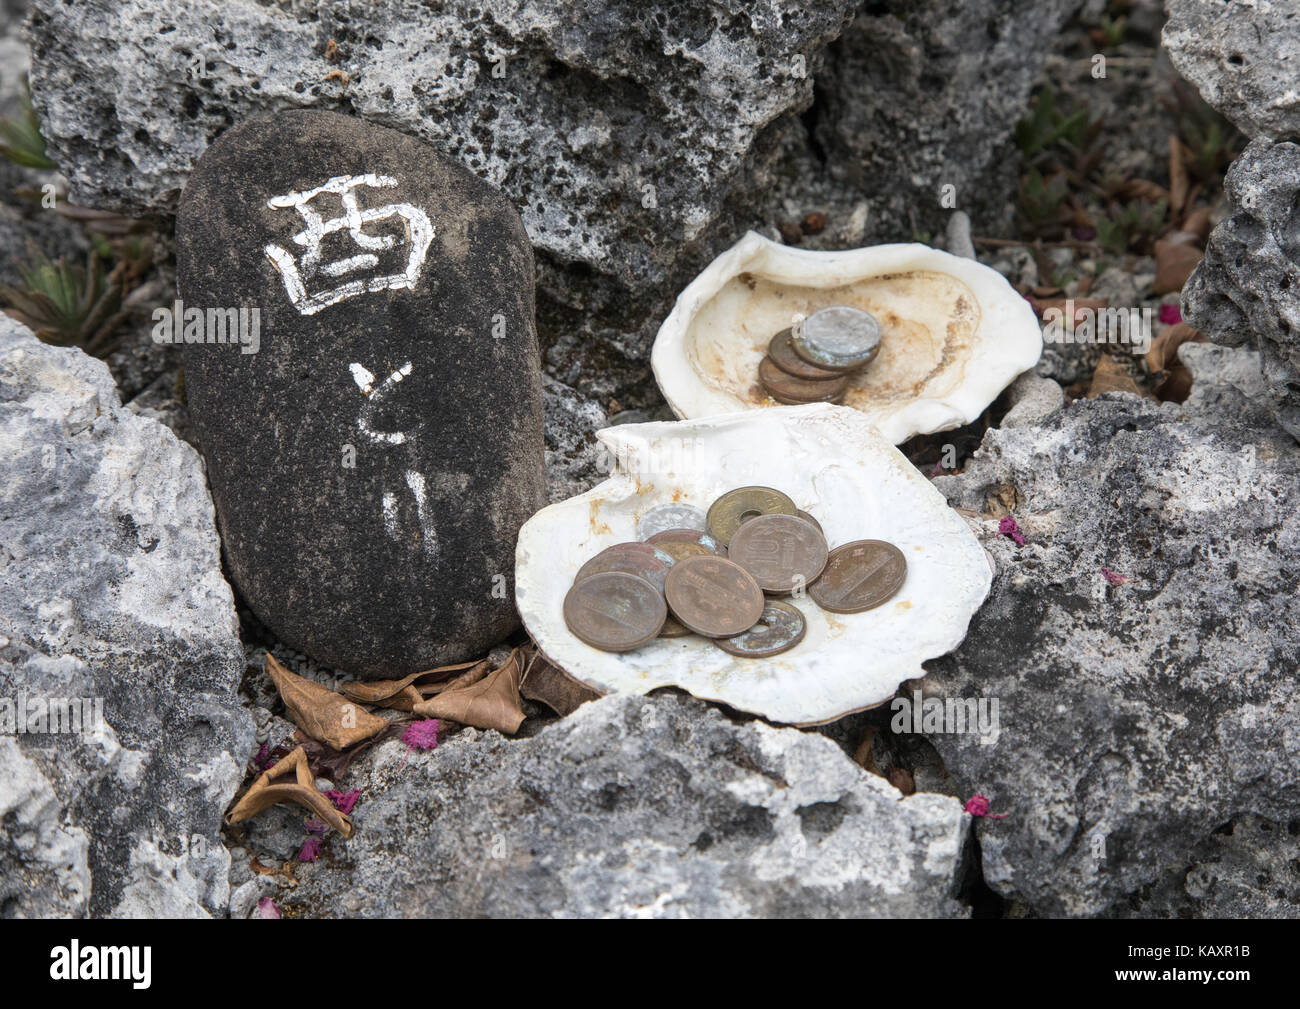 Offerings collected in shells, Yaeyama Islands, Taketomi island, Japan Stock Photo